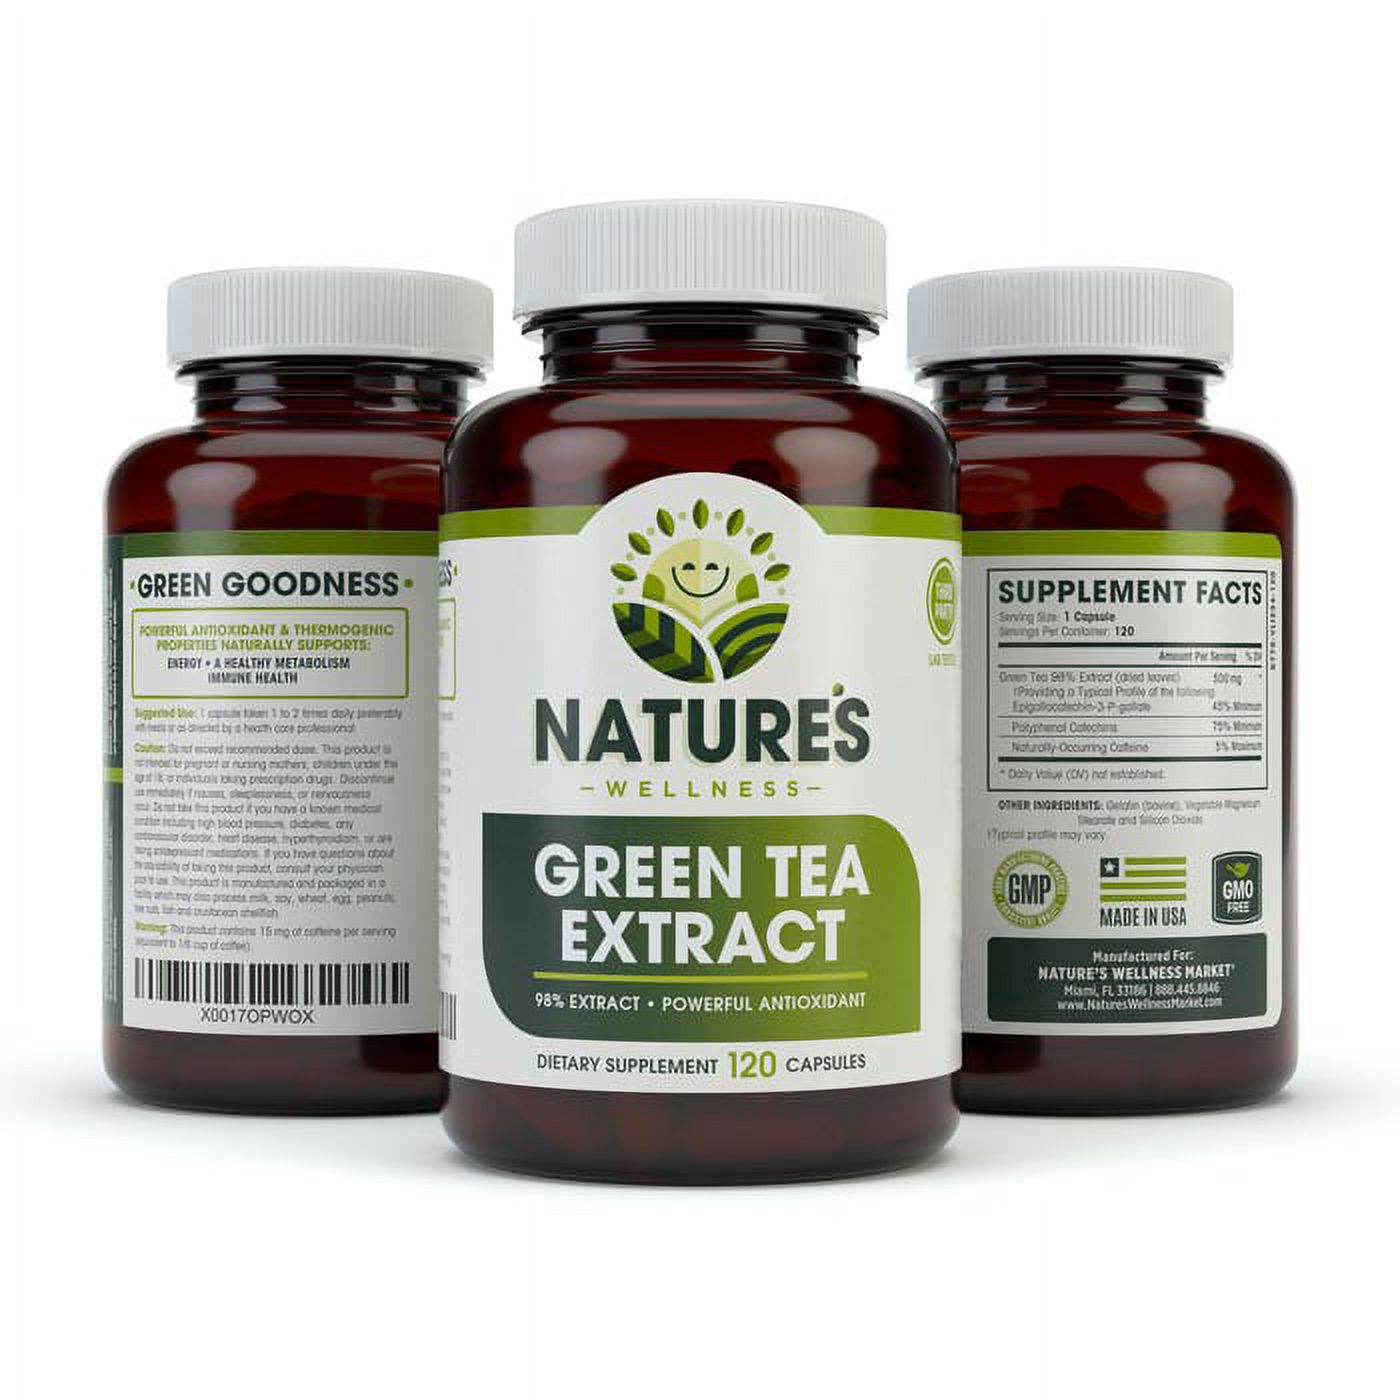 EGCG Green Tea Extract Capsules - Powerful Metabolism Booster for Weight Loss, Energy and Heart Health - Green Tea Pills Are Natural Caffeine Pills with Antioxidants & Free Radical Scavengers - 500mg - image 2 of 8